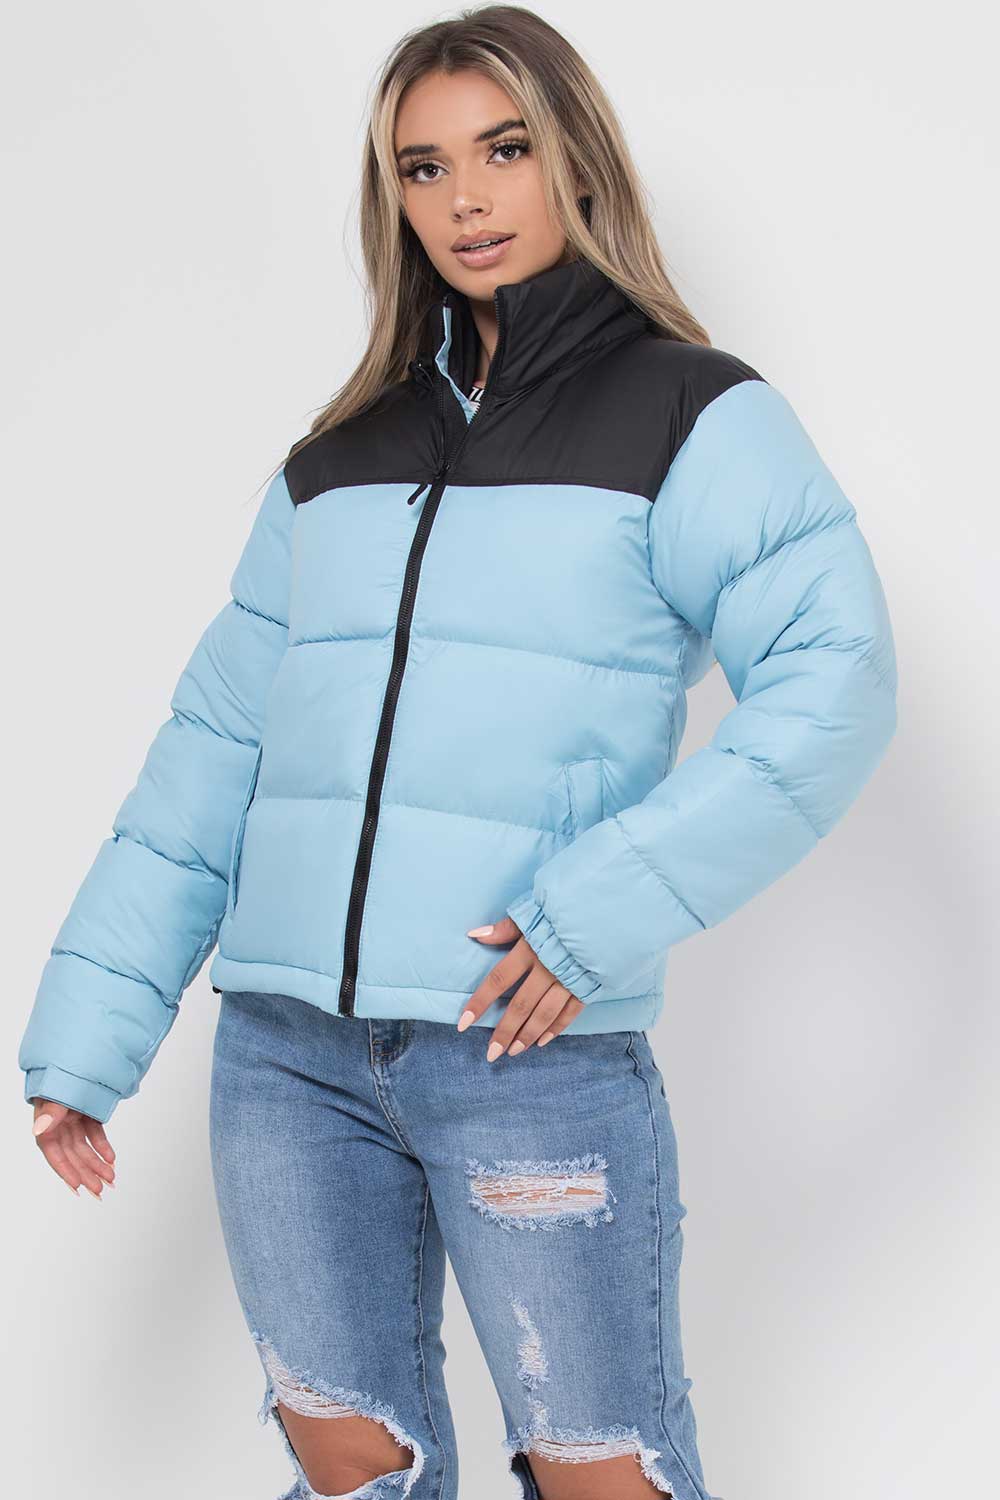 north face inspired puffer jacket 